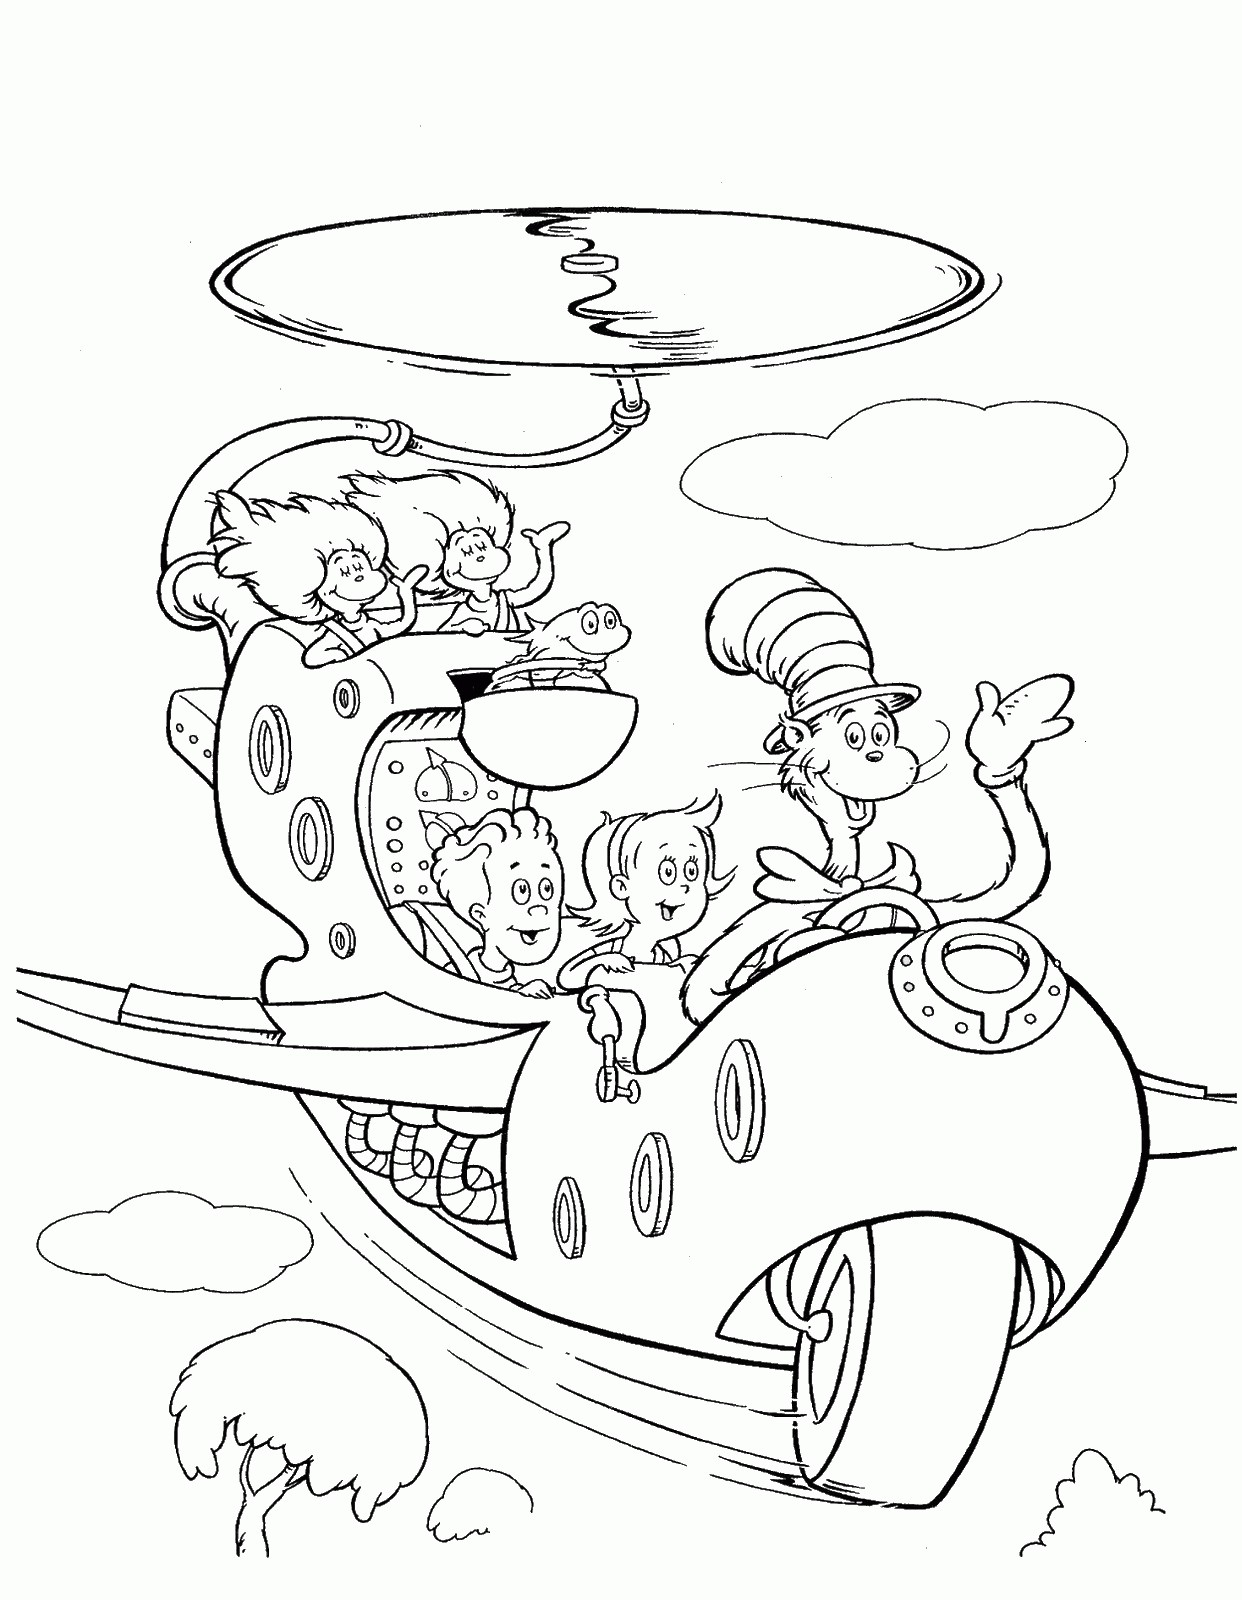 the-cat-in-the-hat-coloring-pages-of-the-cat-in-the-hat-coloring-pages the Cat In the Hat Coloring Pages Animal 